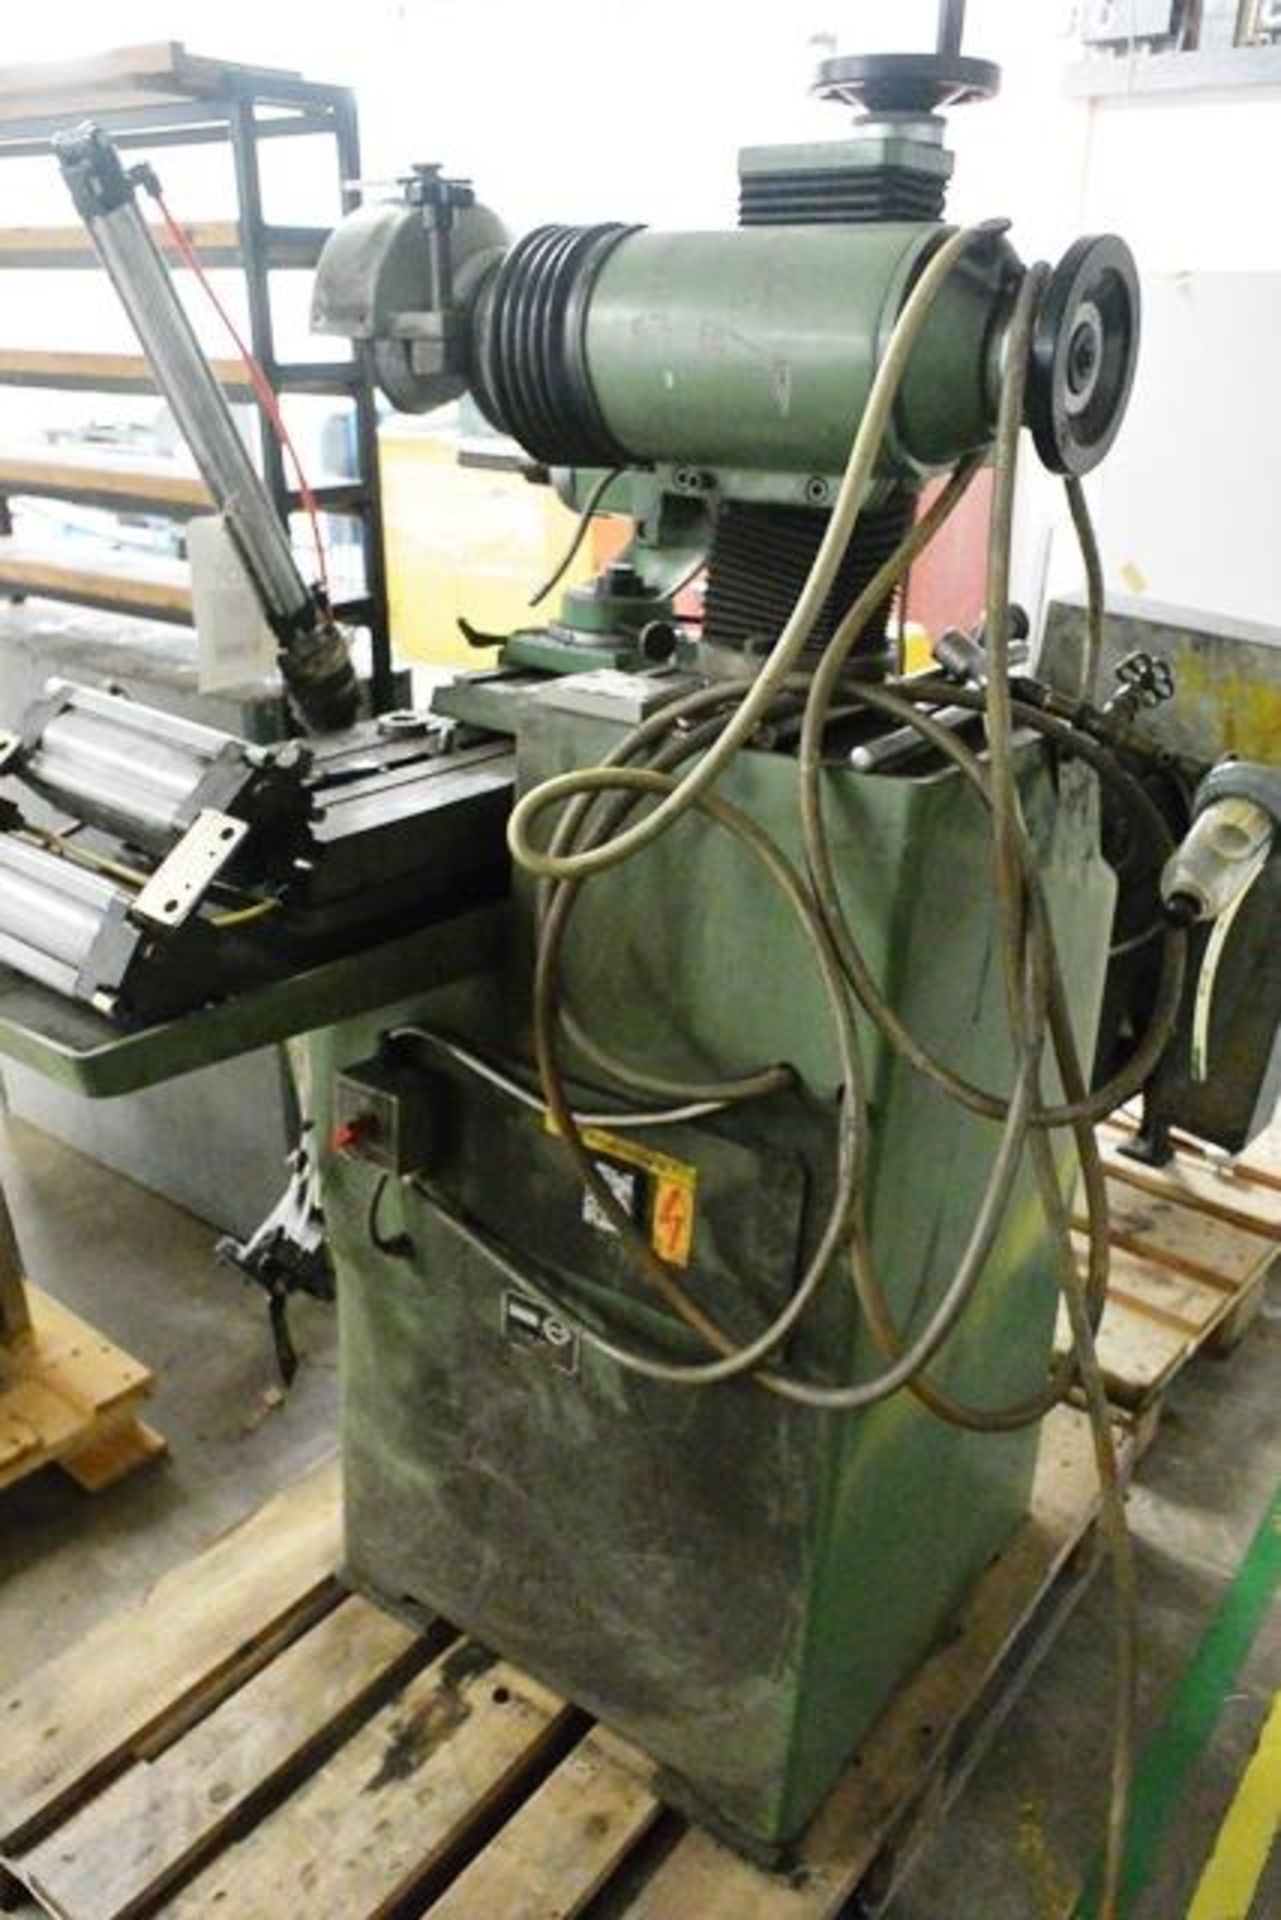 Zuber horizontal surface grinder, machine no. 06013, approx table dimension 900 x 270mm - Image 7 of 7